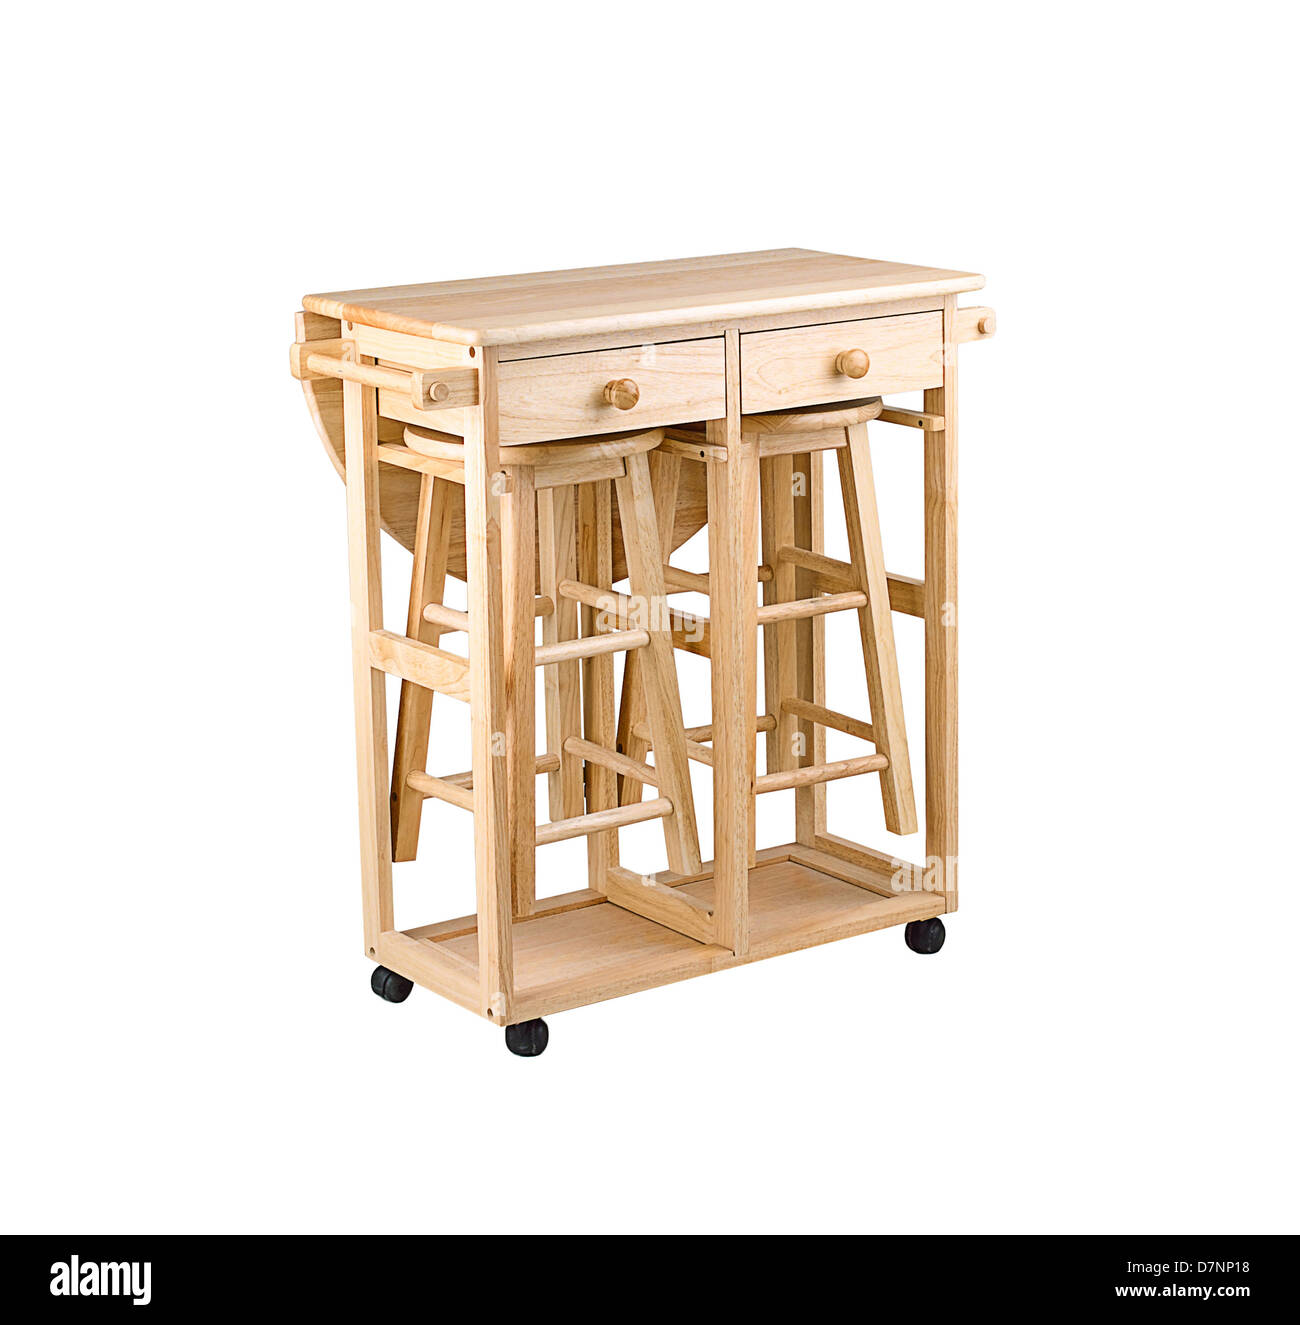 Folding And Movable Wooden Table With Drawers For Small Kitchen